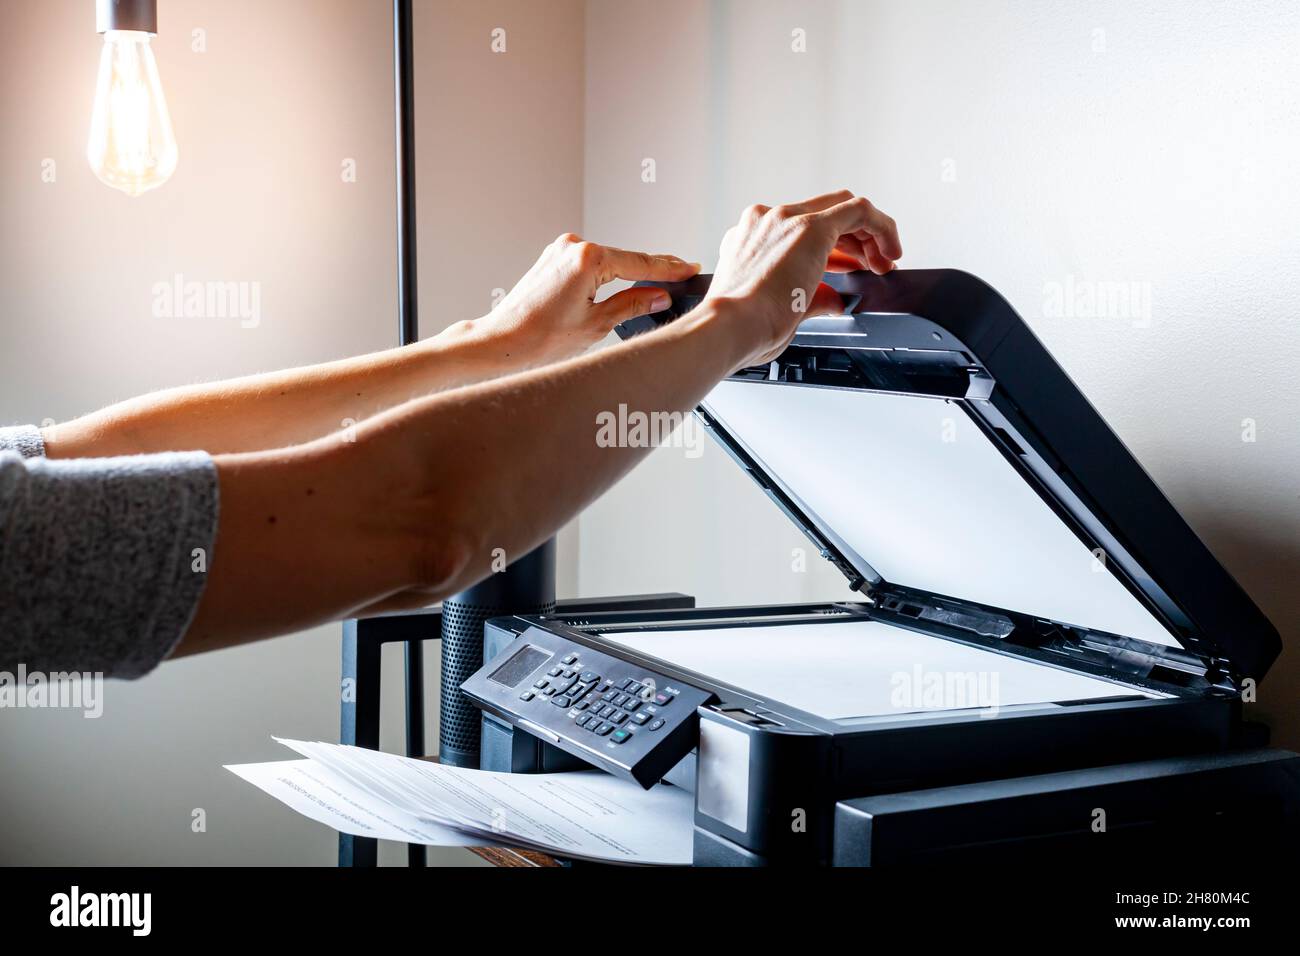 Concept image for office work. A woman is placing or removing paper. There is a wireless photocopier, scanner, printer combo device on top of a shelvi Stock Photo